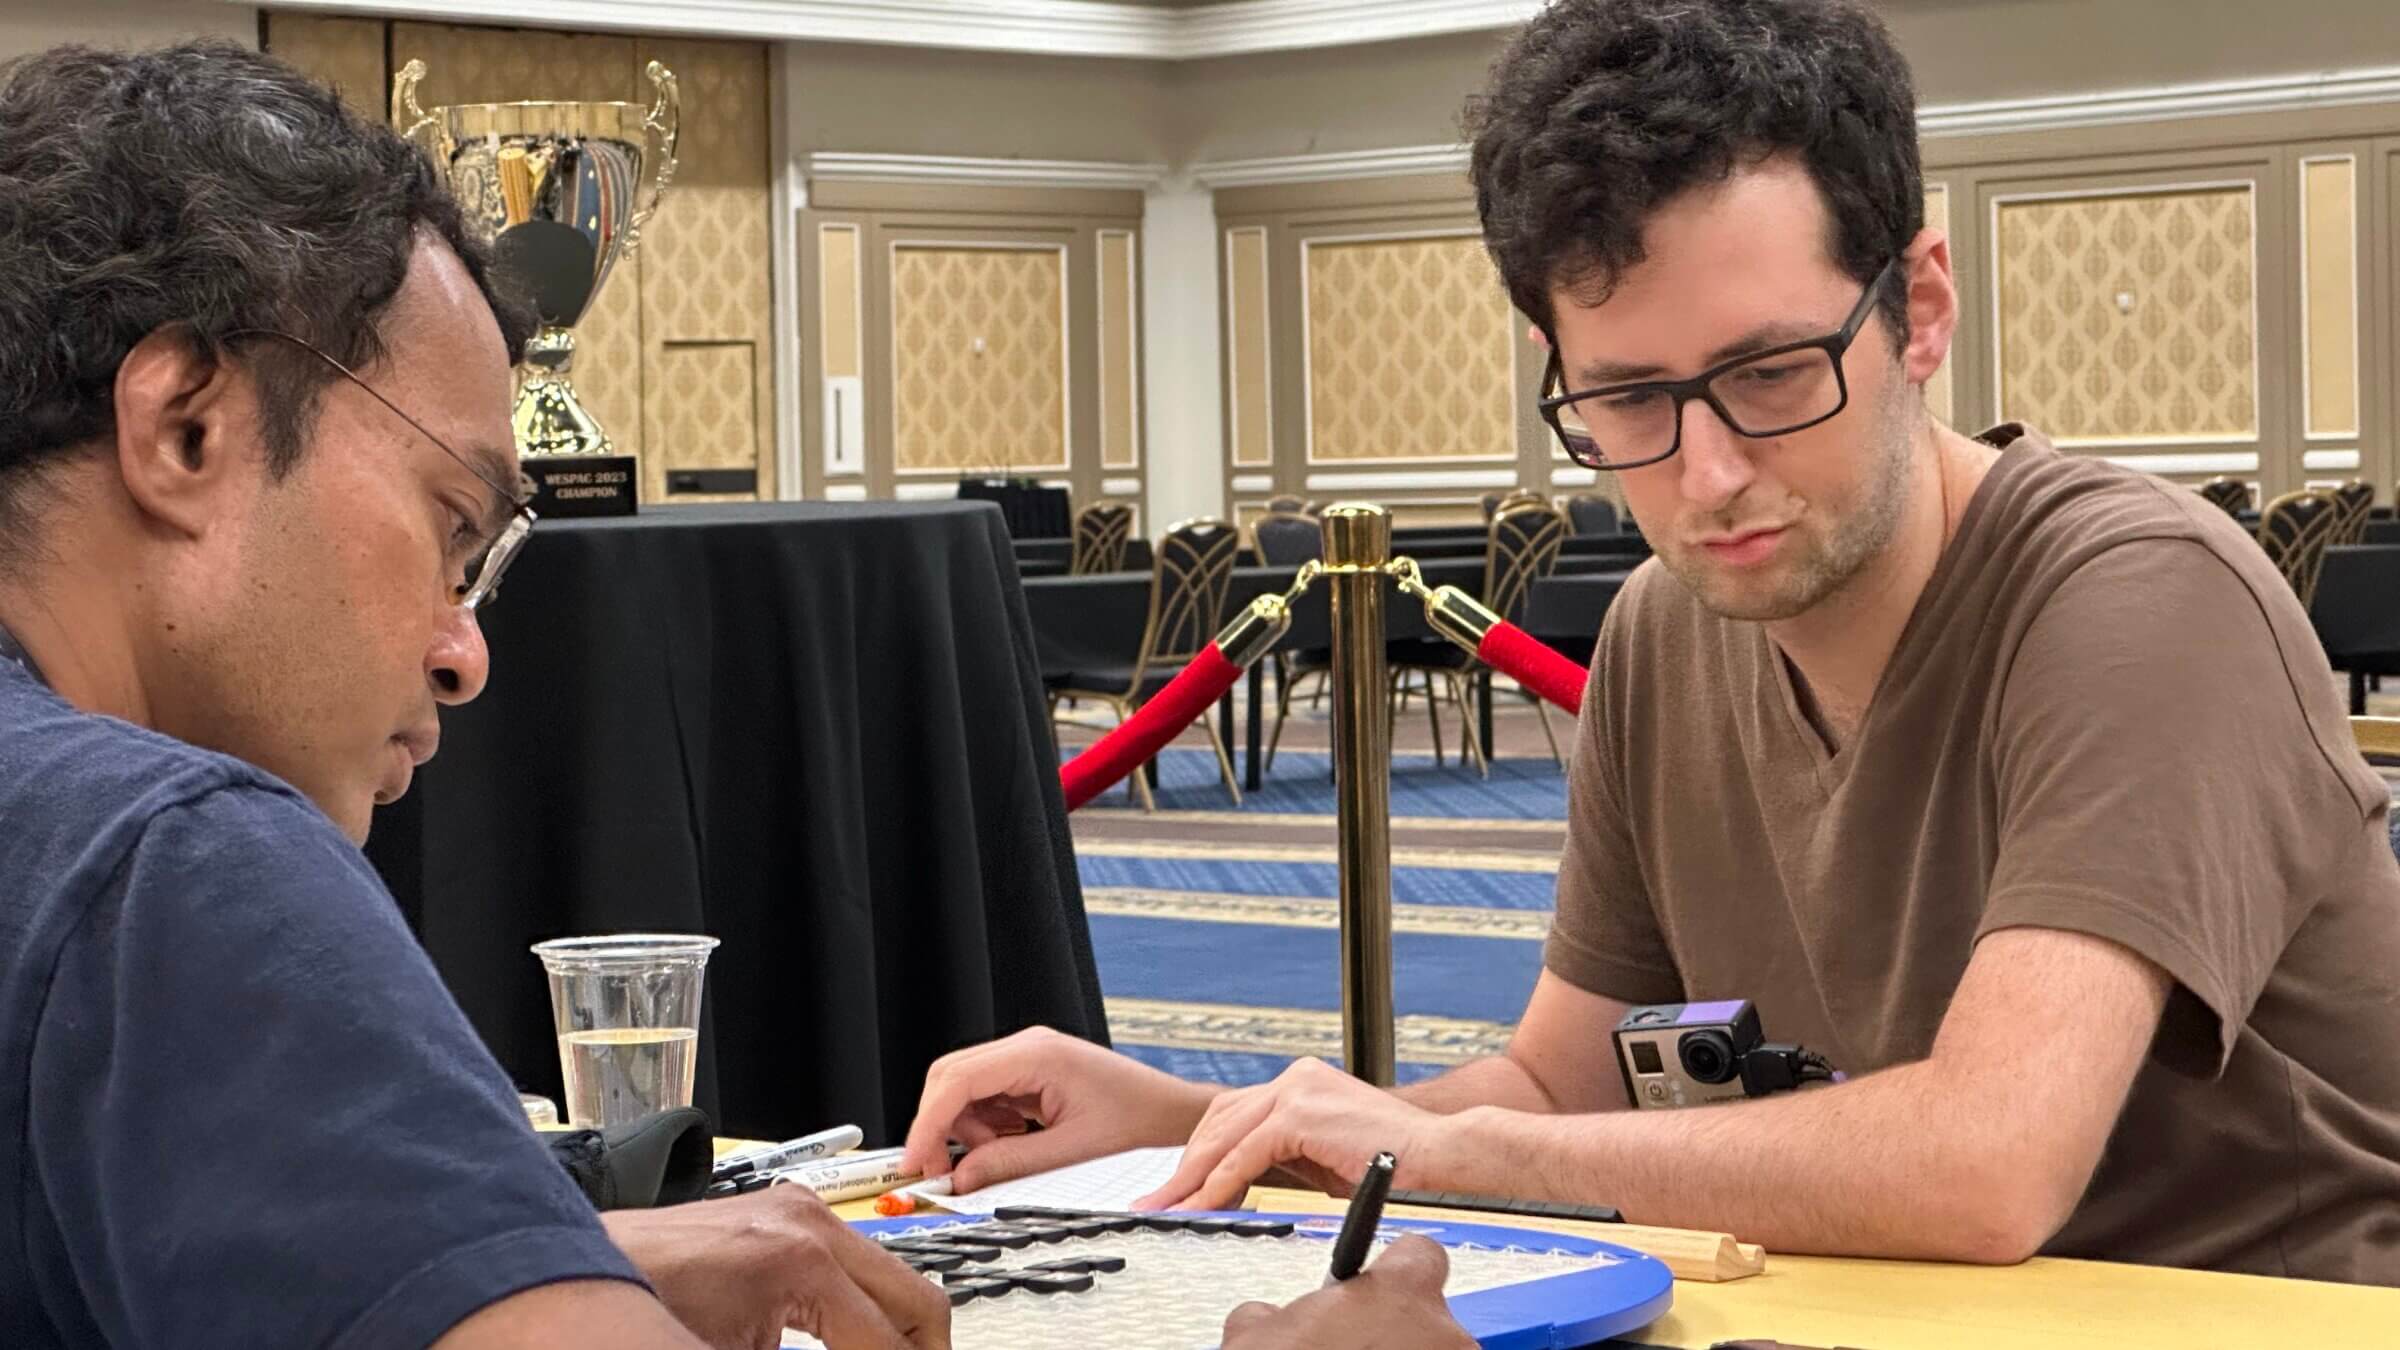 David Eldar, right, during the 2023 Scrabble championship tournament. He defeated Harshan Lamabadusuriya, left, to win the tournament.